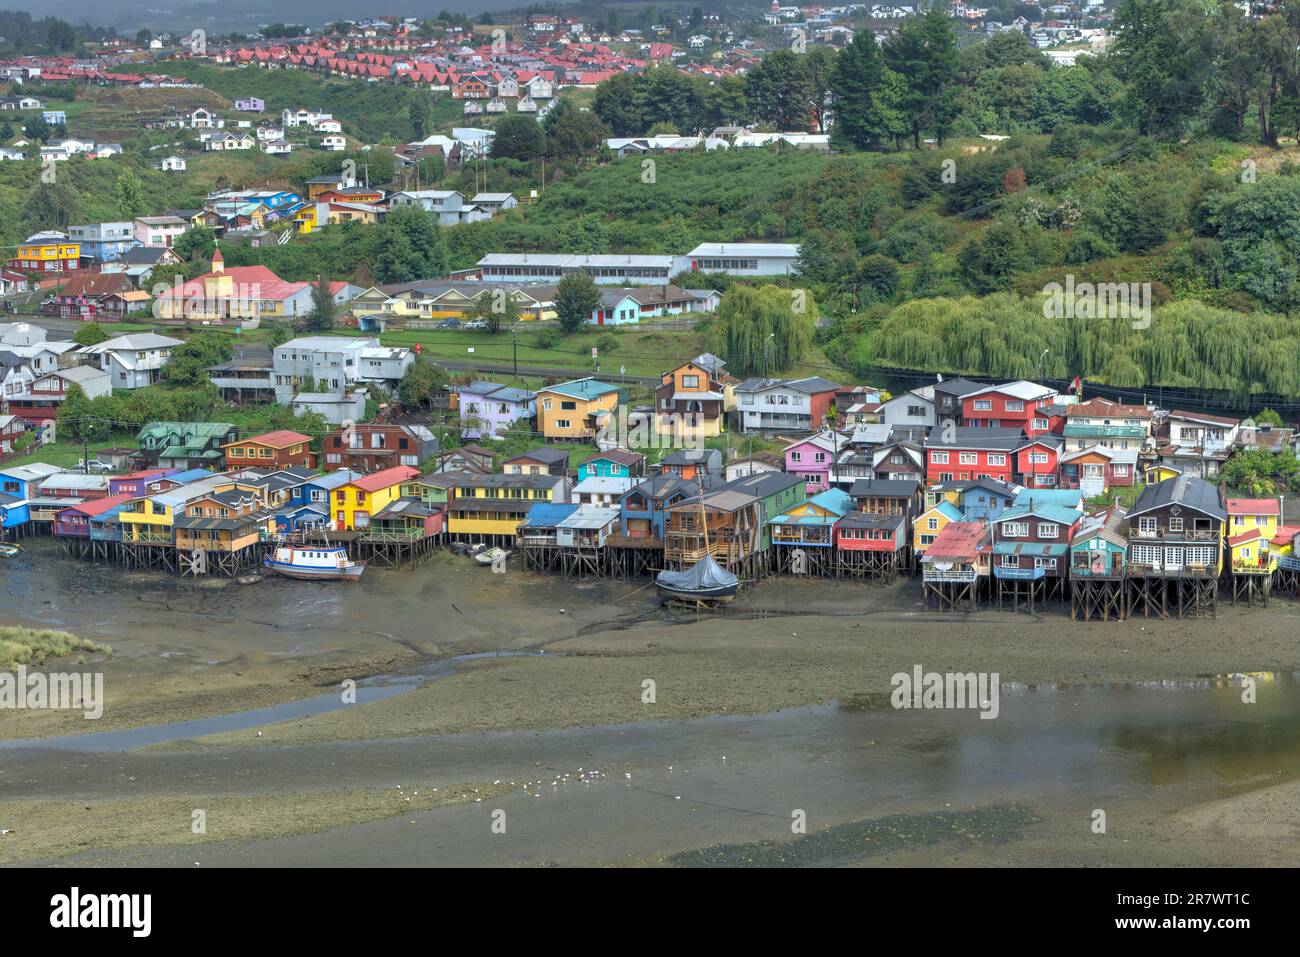 The Palafitos of Chiloe - colorful wooden houses on stilts along the river, Castro, Chiloe Island, Chile Stock Photo